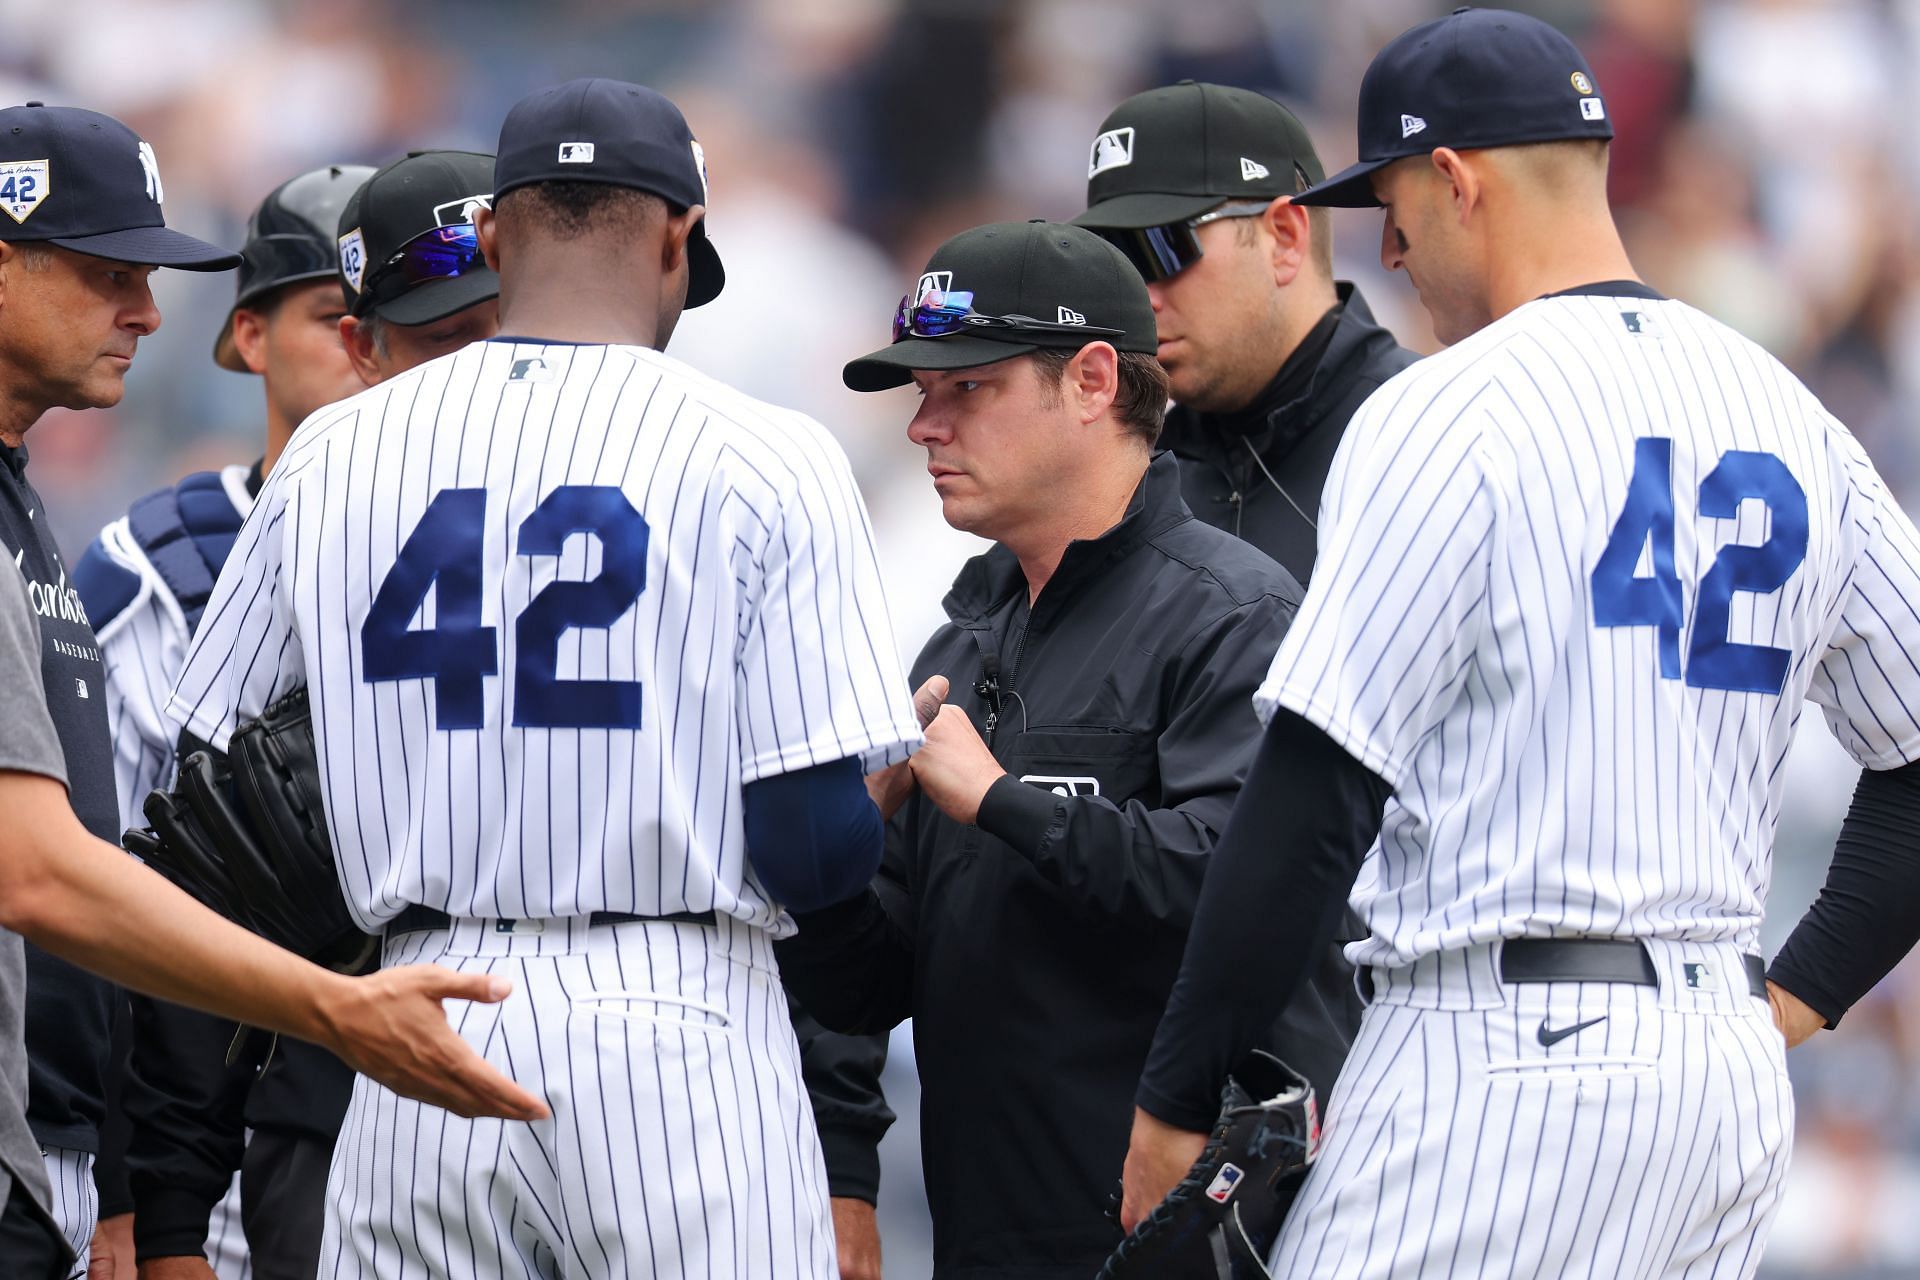 Yankees pitcher suspended for using foreign substance